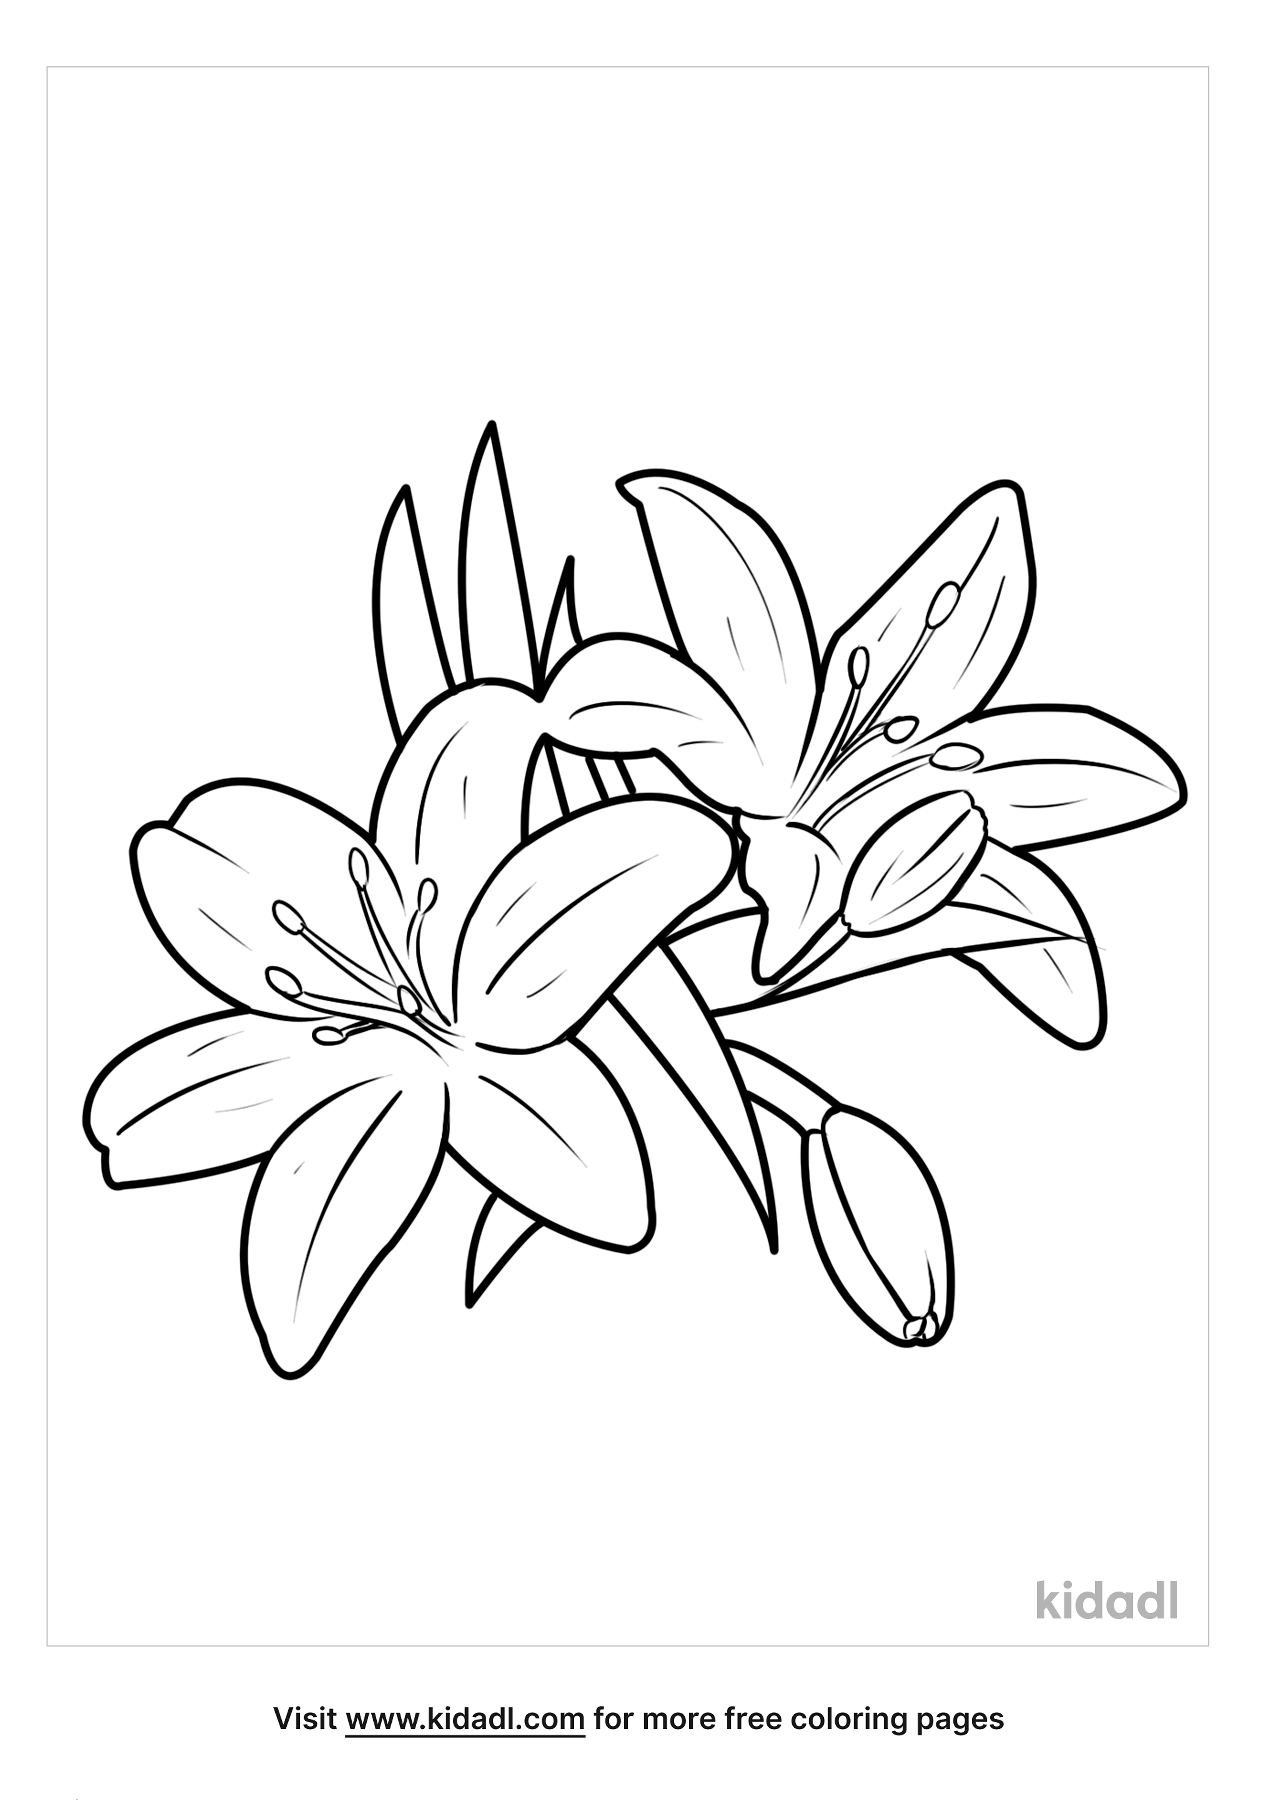 Lily Coloring Pages | Free Flowers Coloring Pages | Kidadl